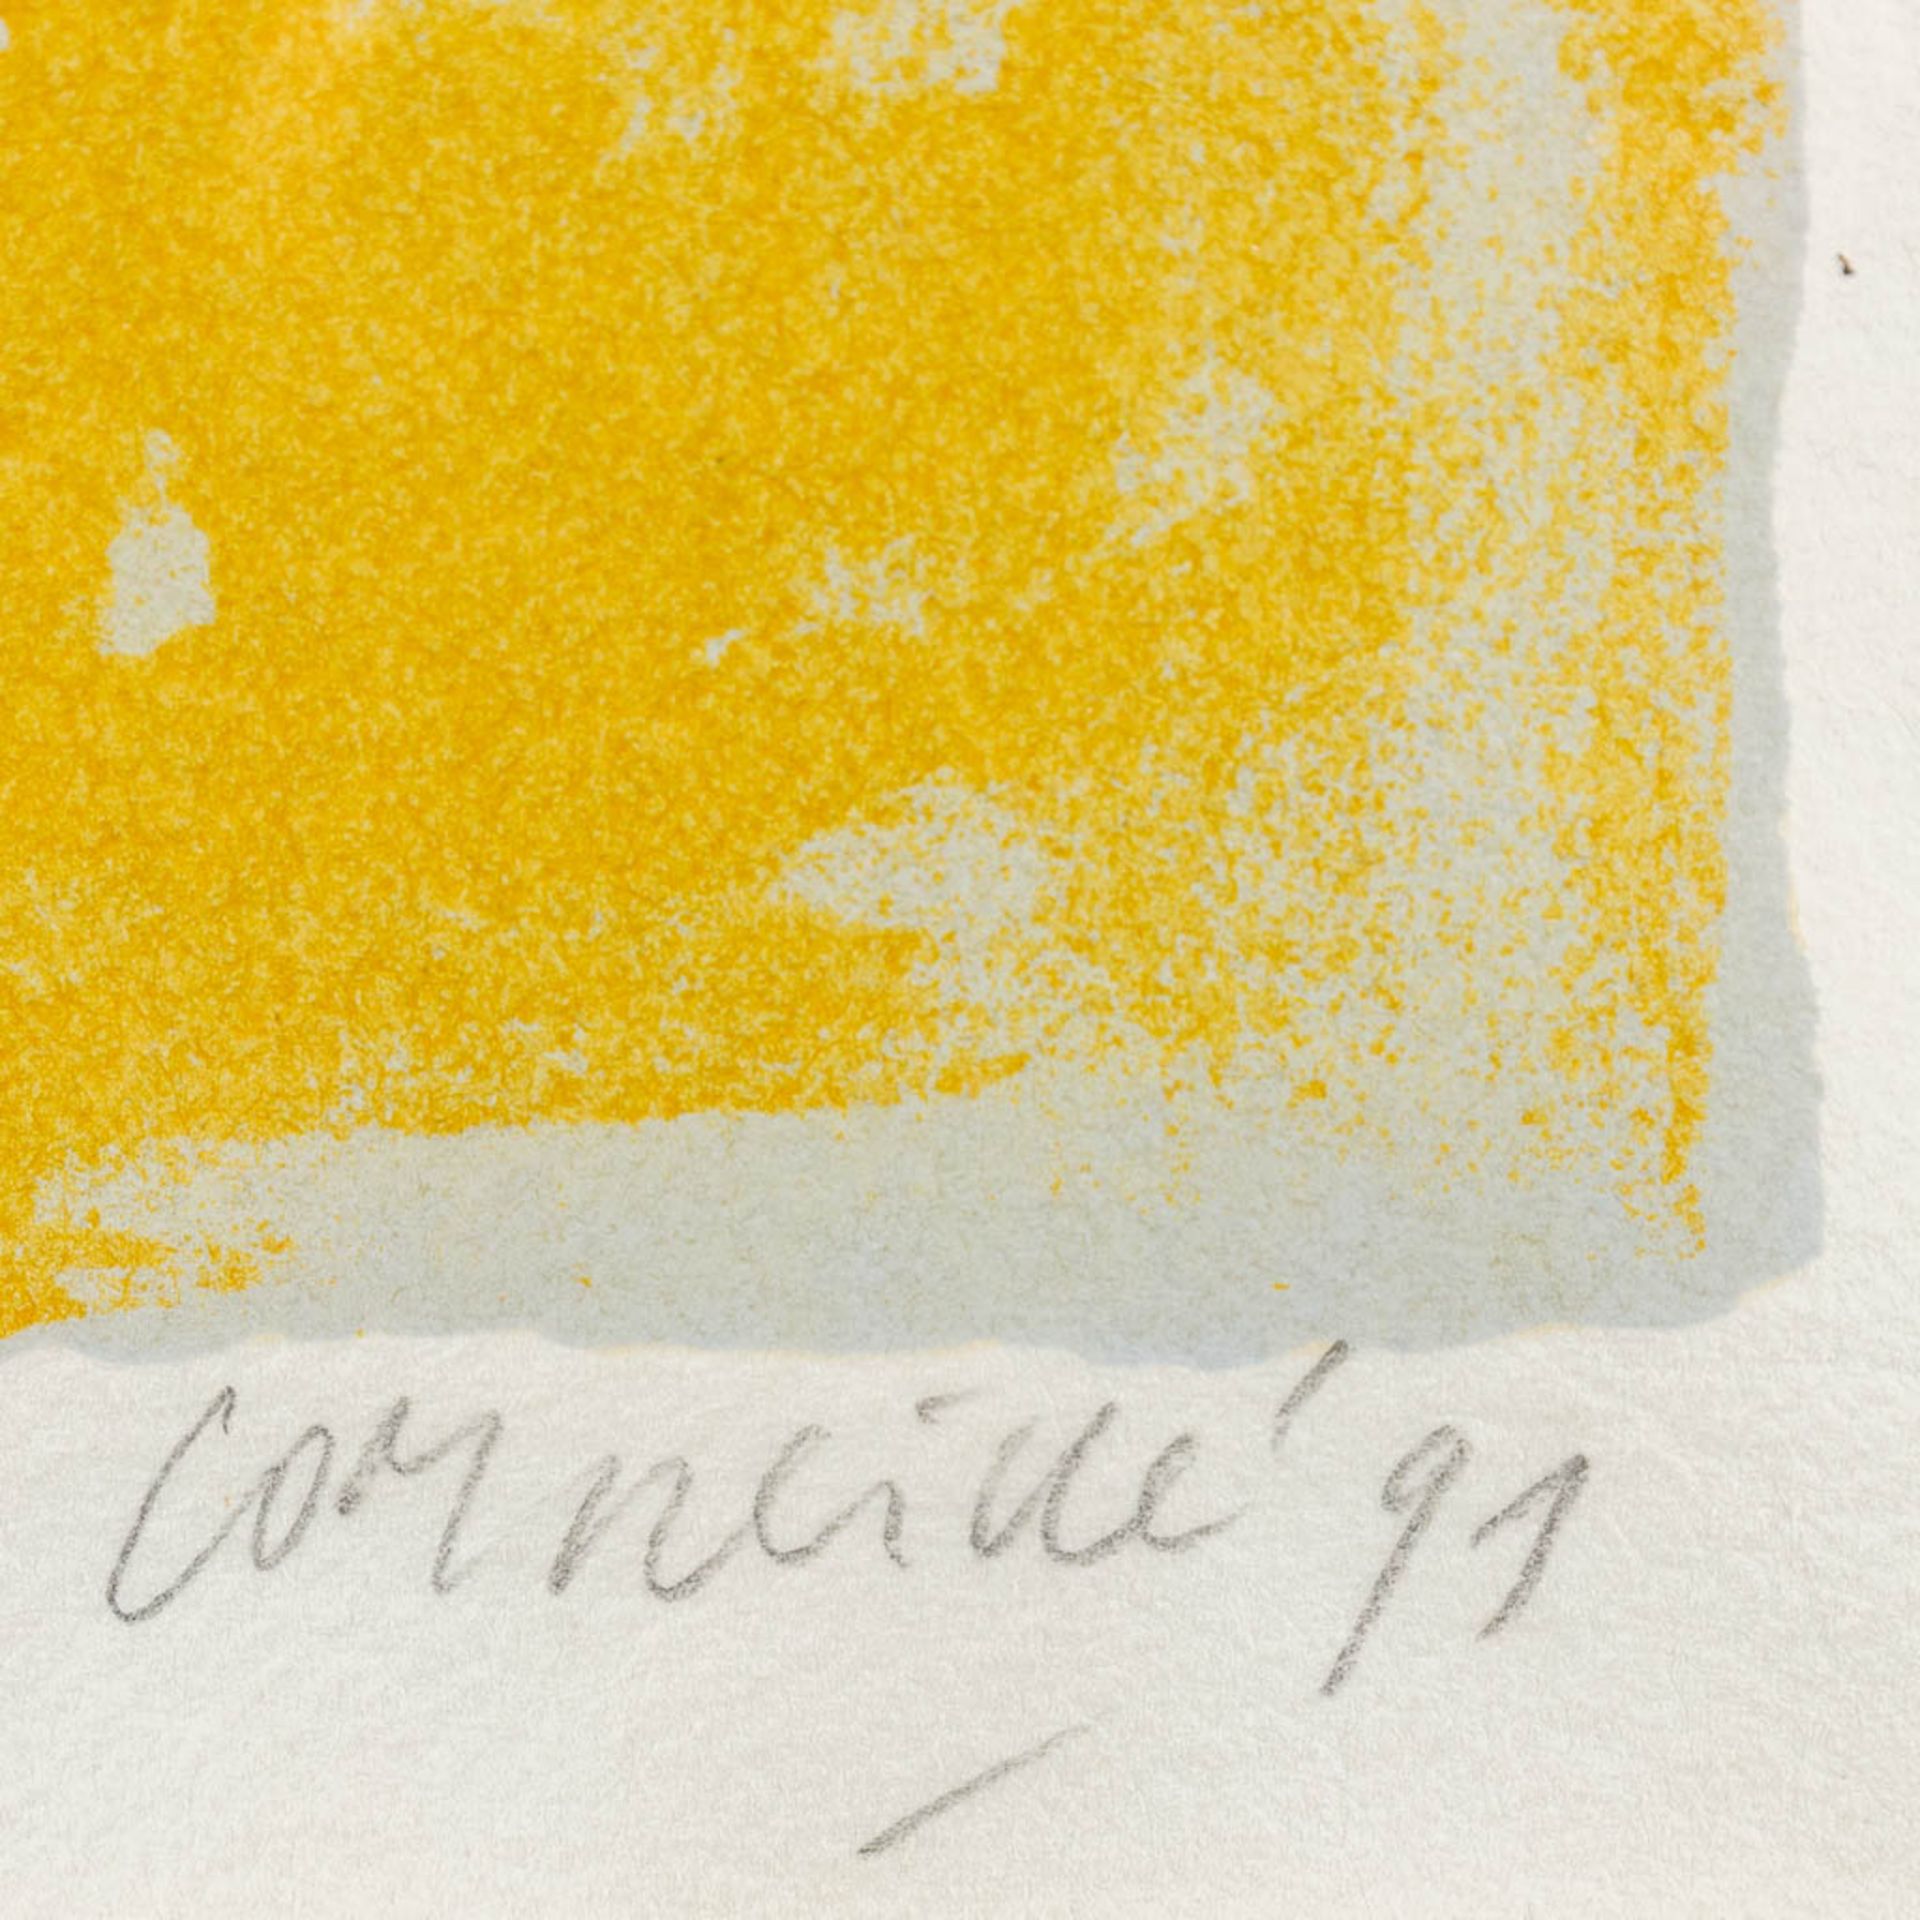 CORNEILLE (1922-2010) 'Untitled' a lithograph, 178/200 (W:42 x H:32 cm) - Image 6 of 7